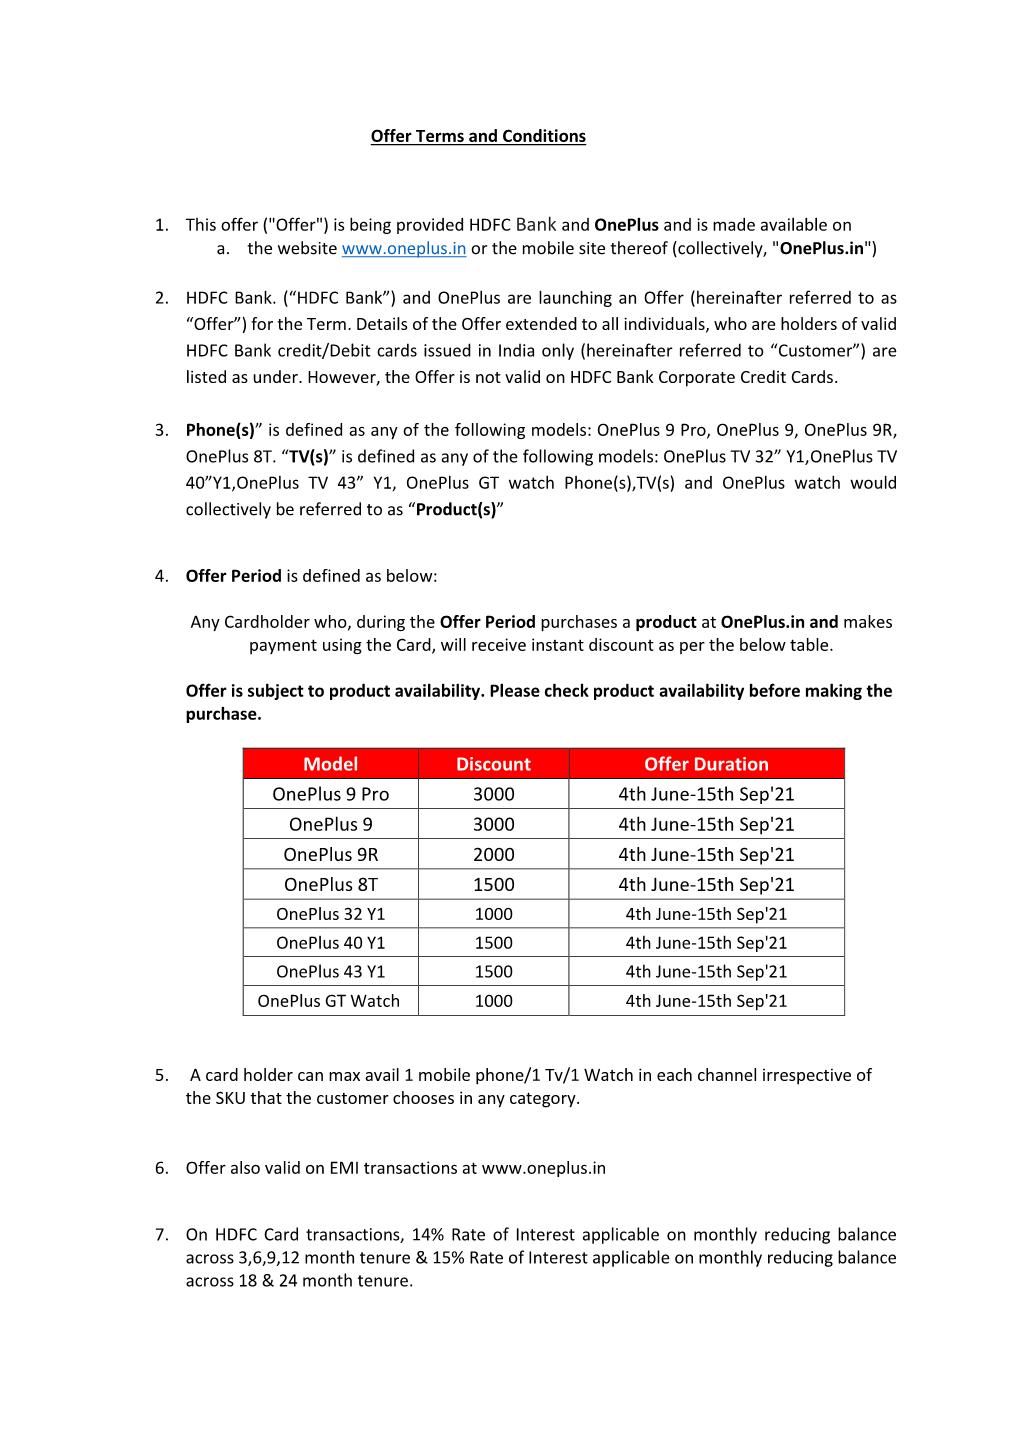 Model Discount Offer Duration Oneplus 9 Pro 3000 4Th June-15Th